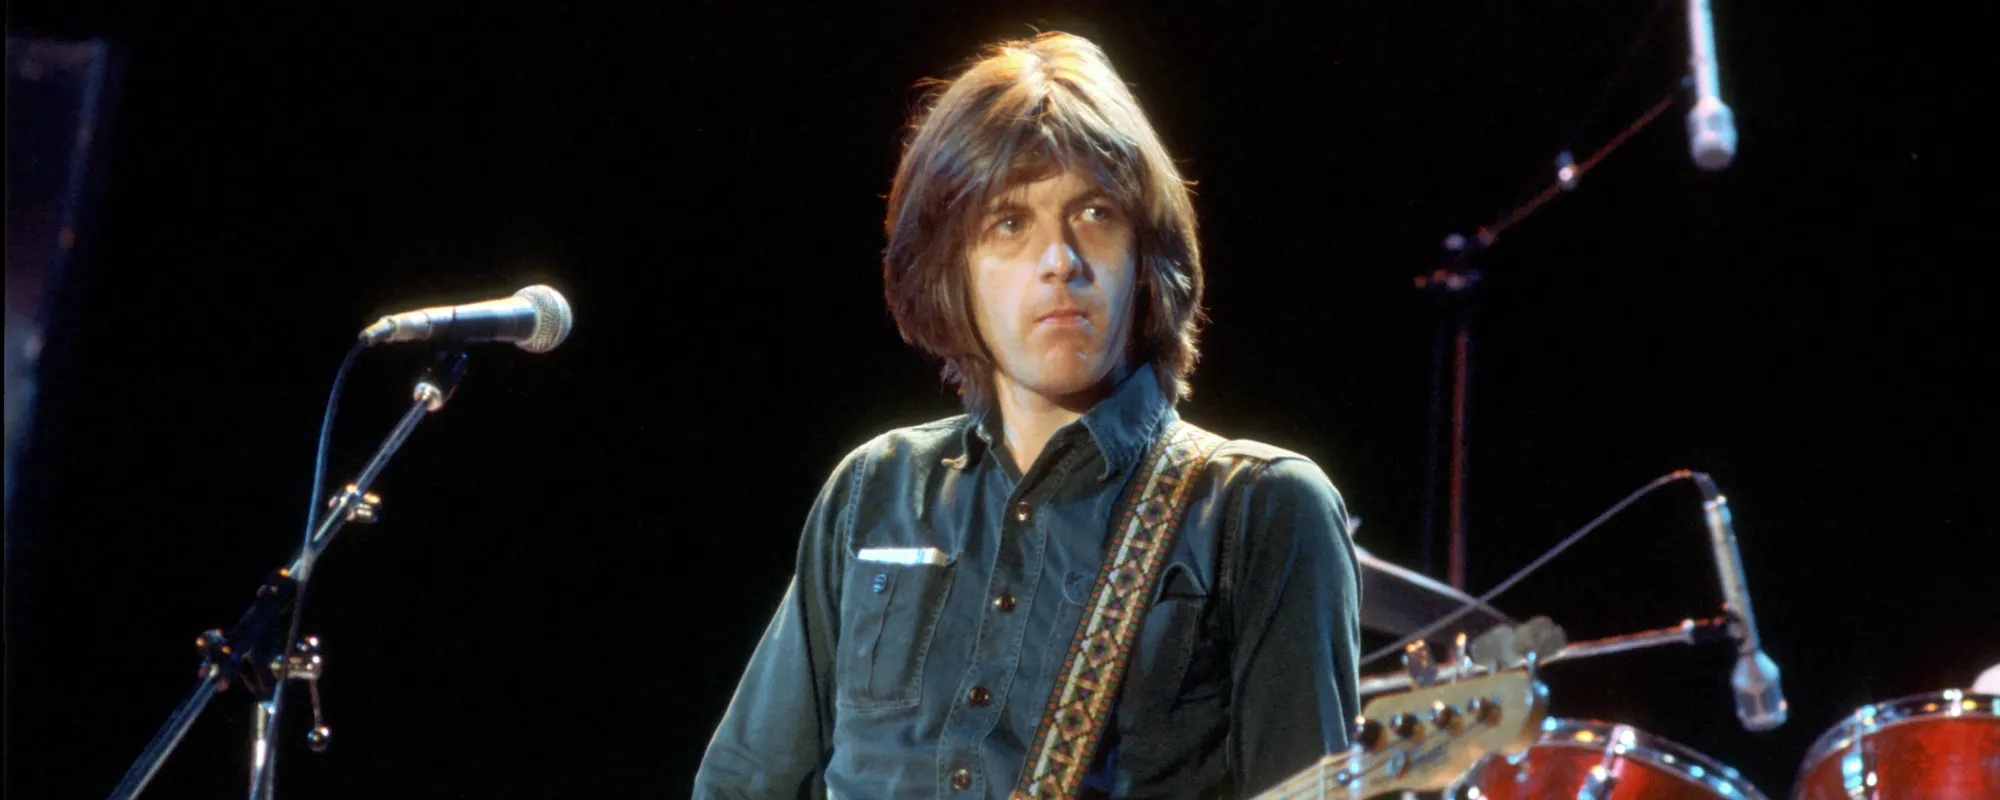 5 Fascinating Facts About Nick Lowe